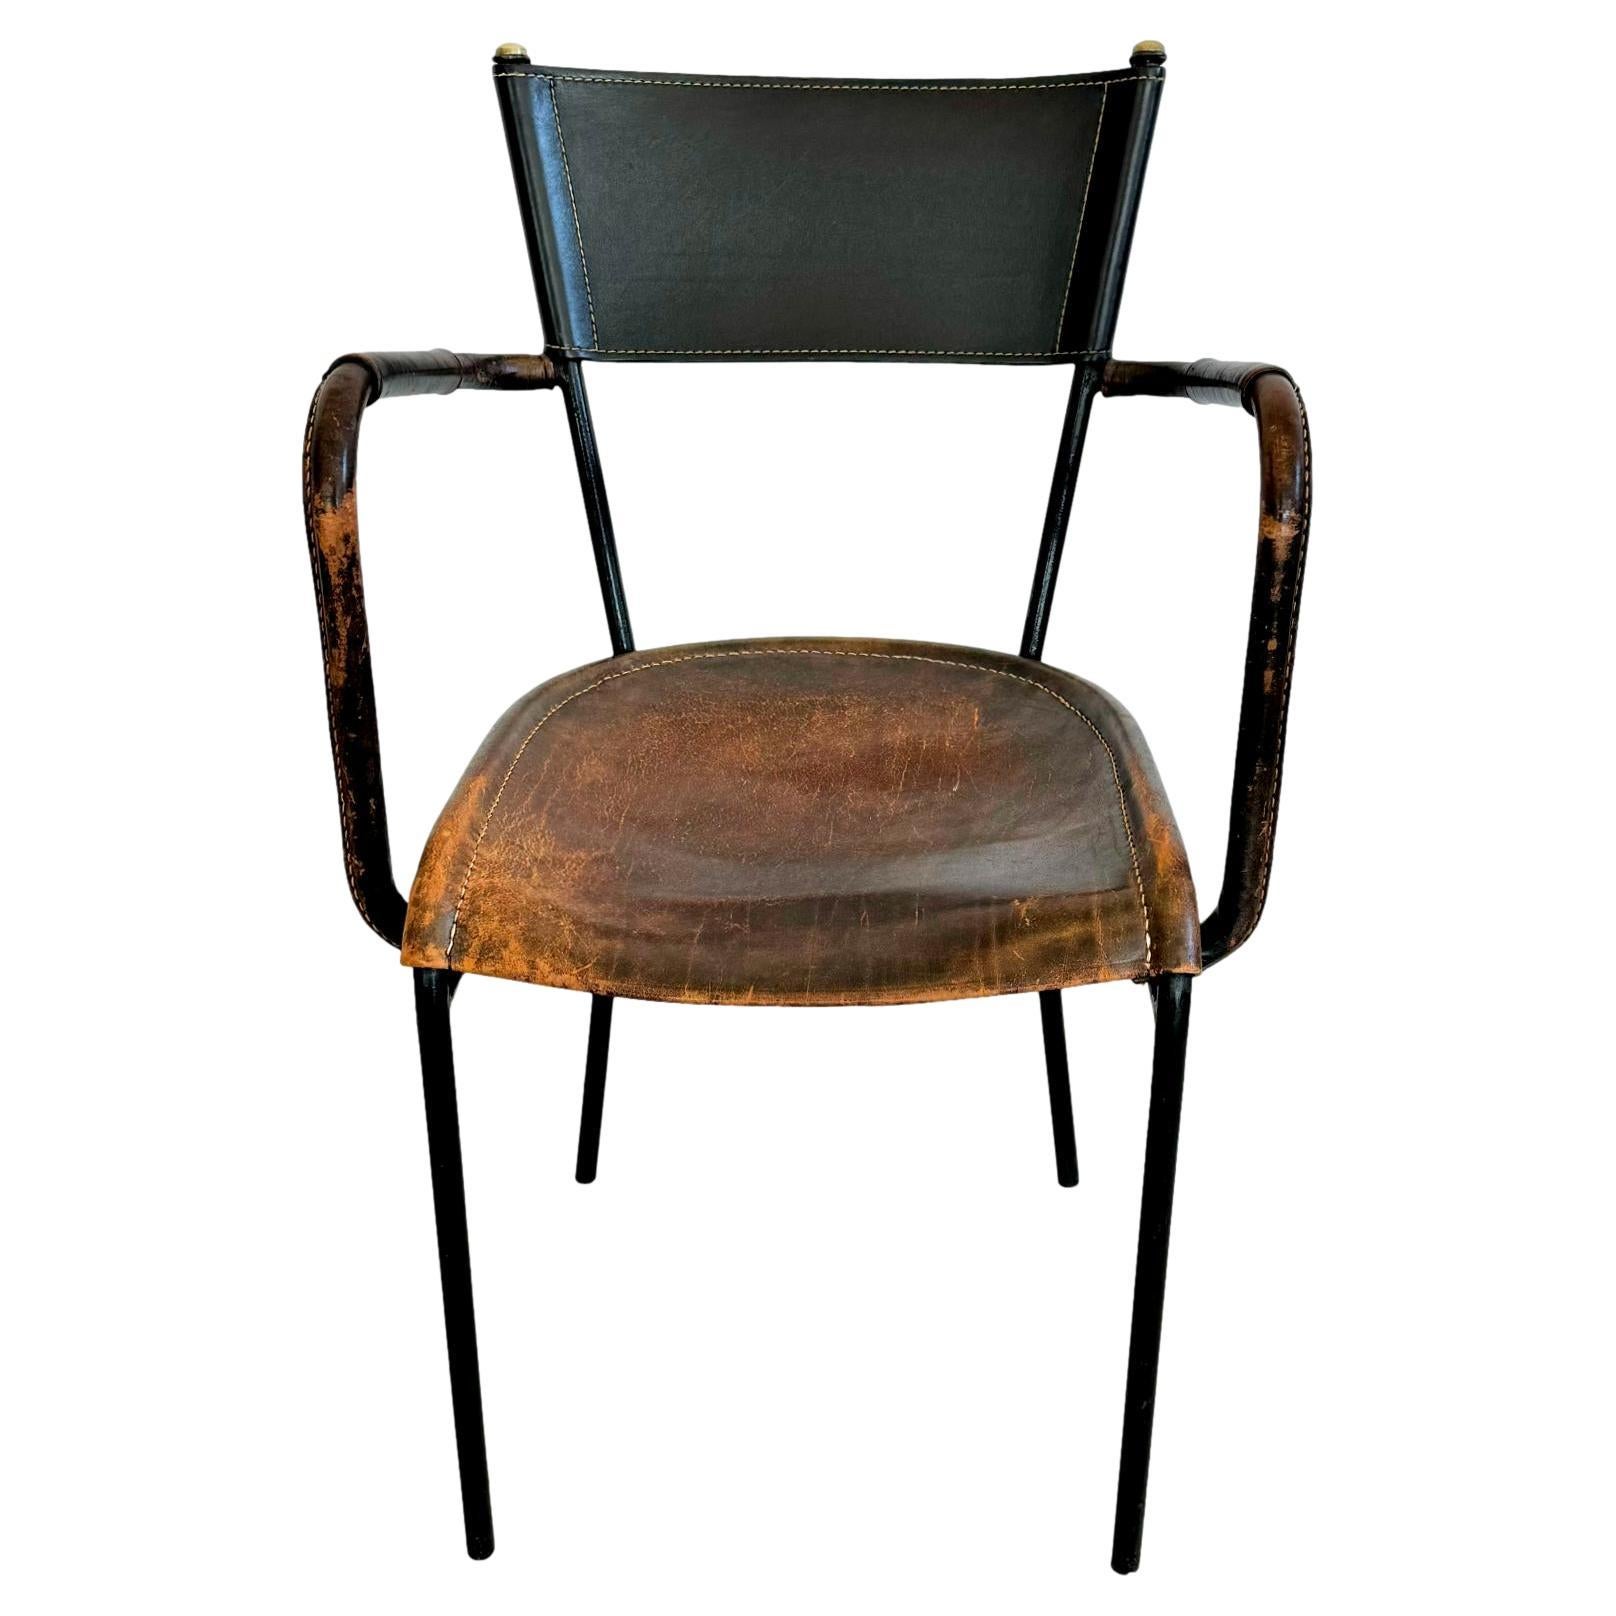 Jacques Adnet Sculptural Leather Armchair, 1950s France For Sale